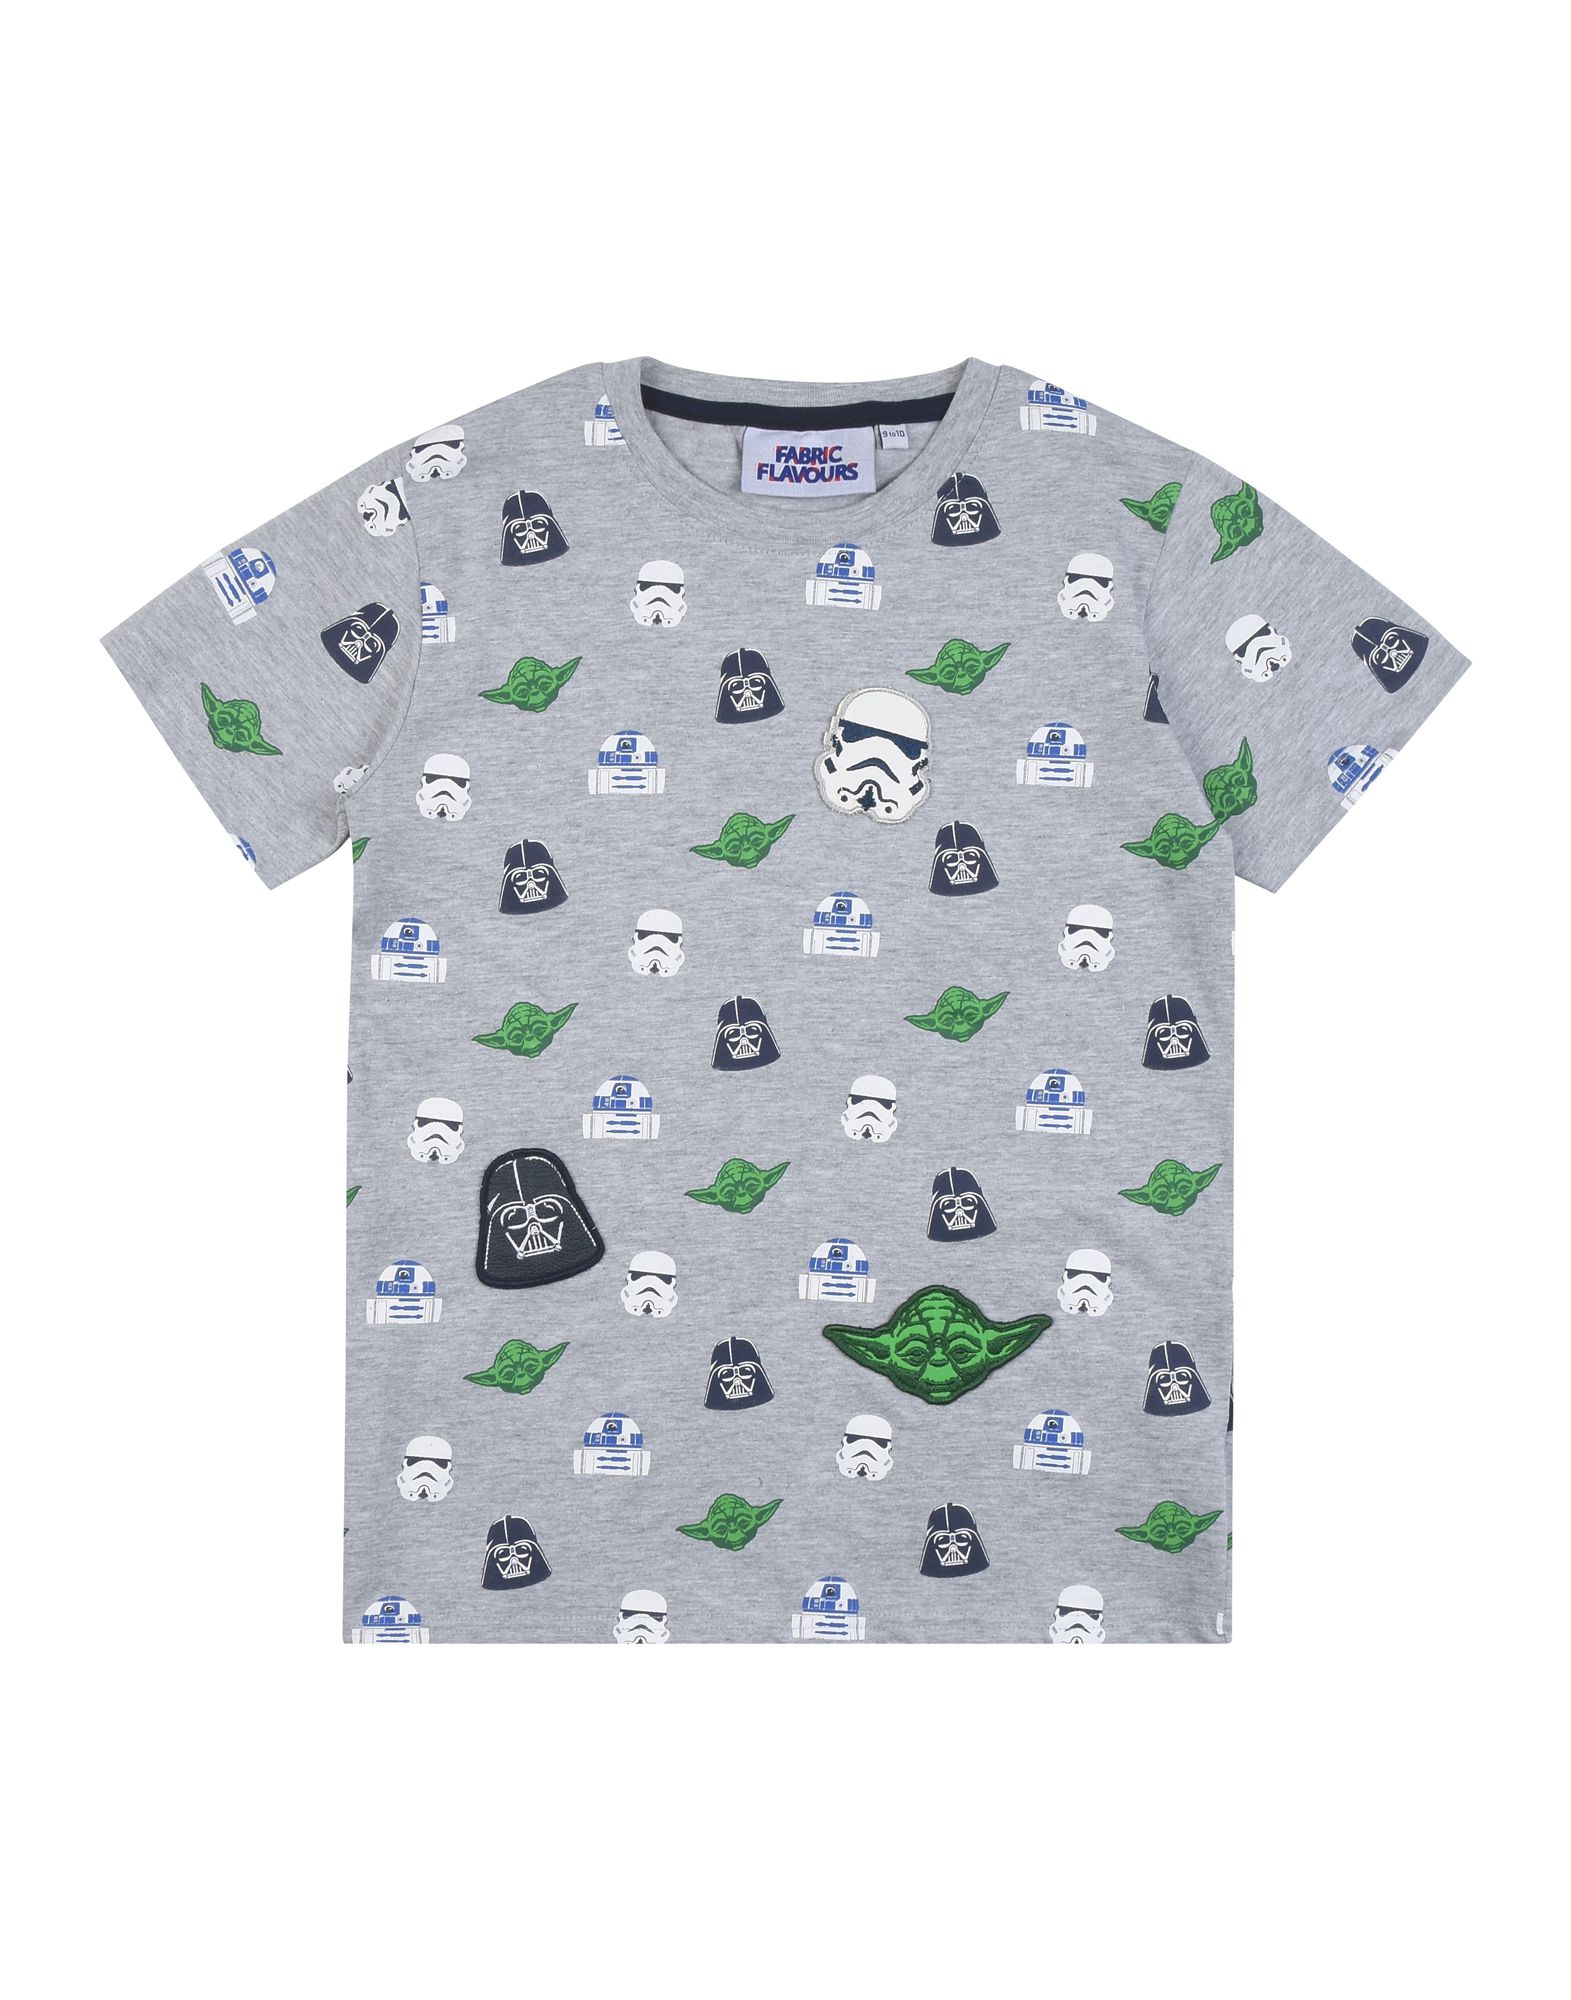 FABRIC FLAVOURS Star Wars Multi Character T-Shirt